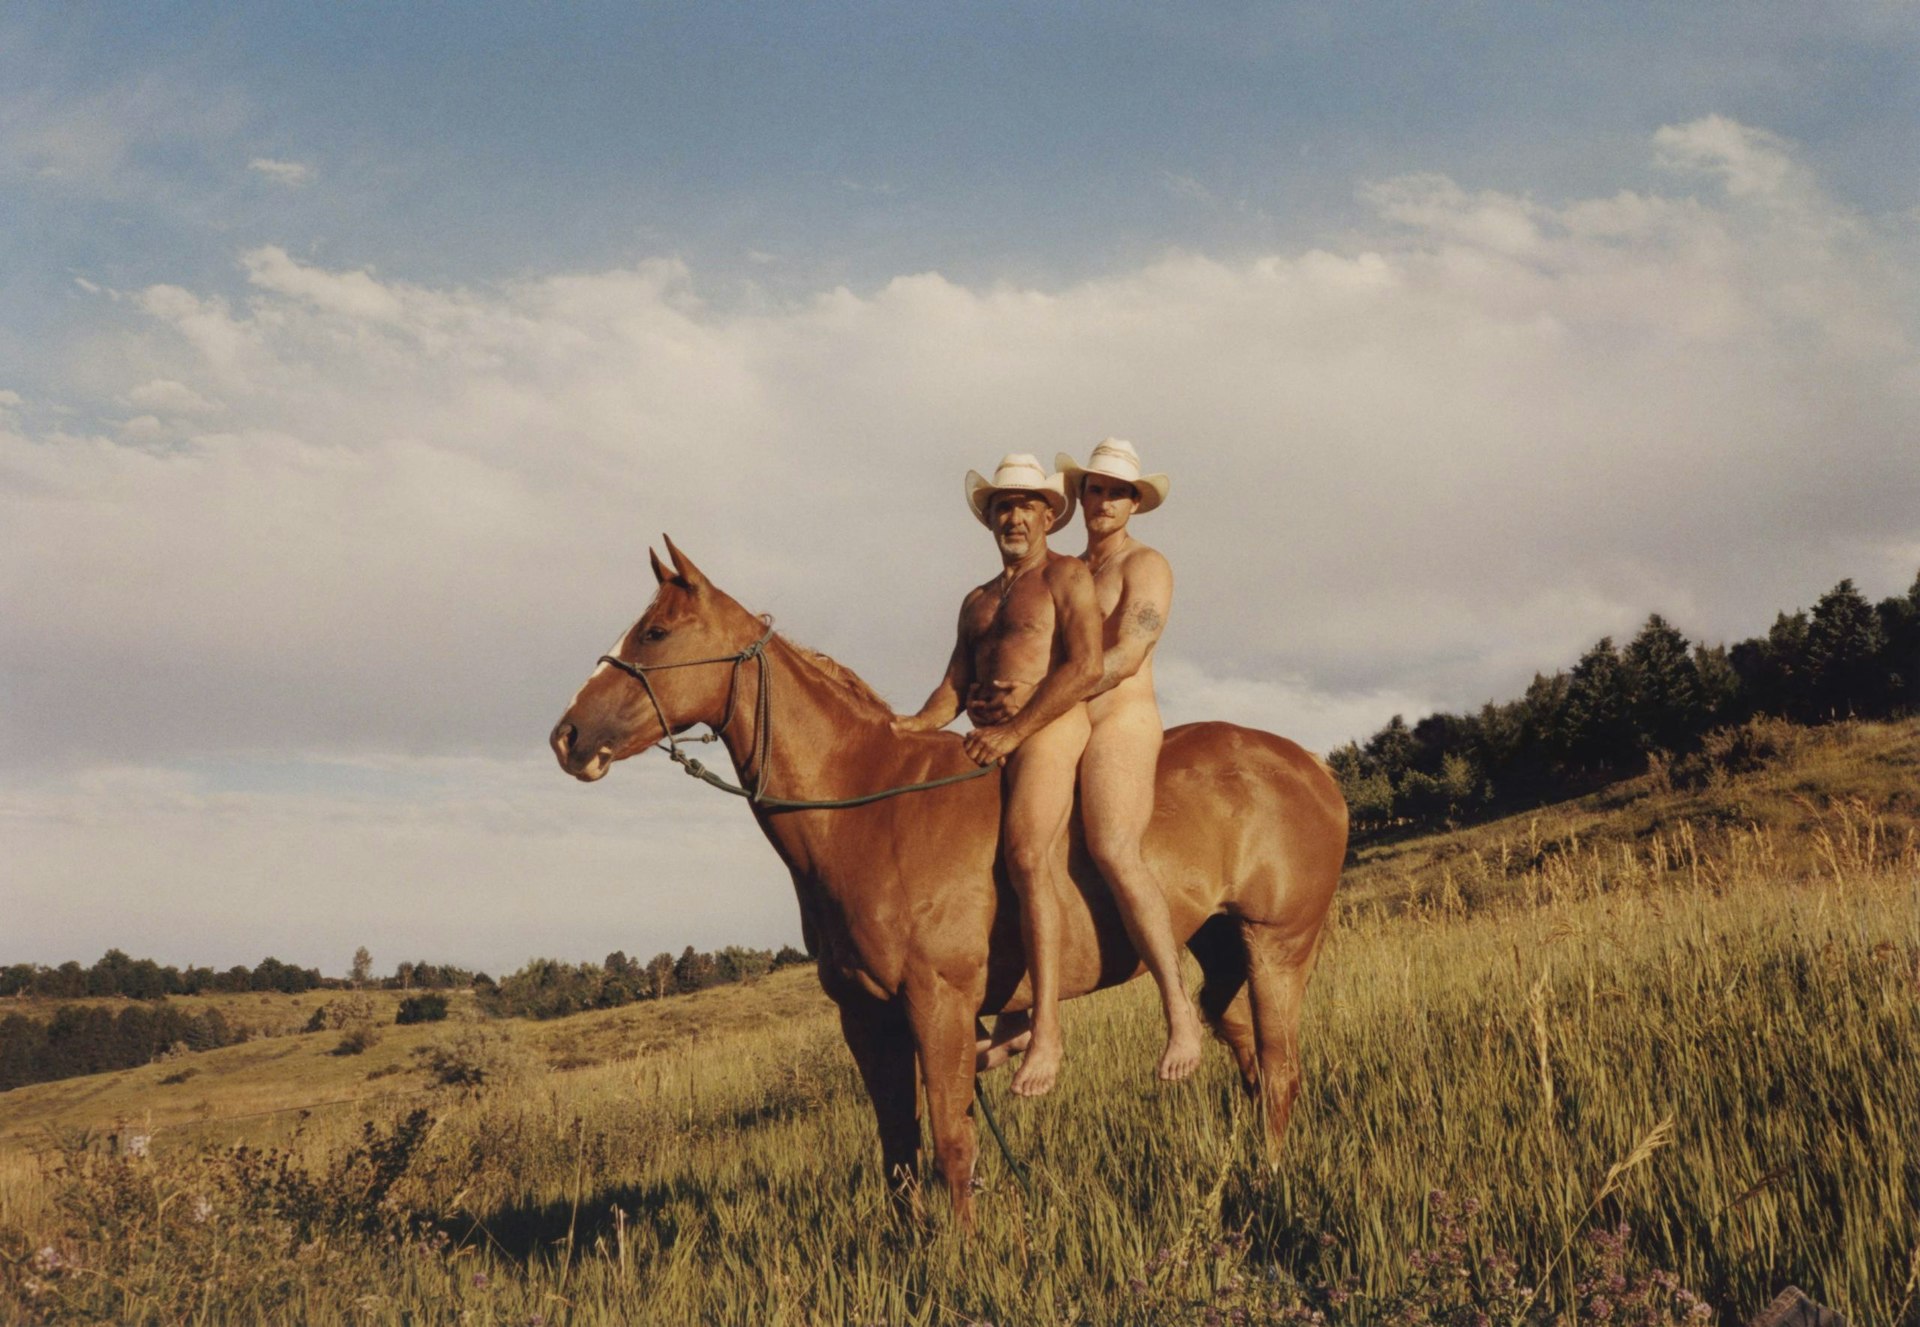 An electric portrait of America’s gay rodeo scene